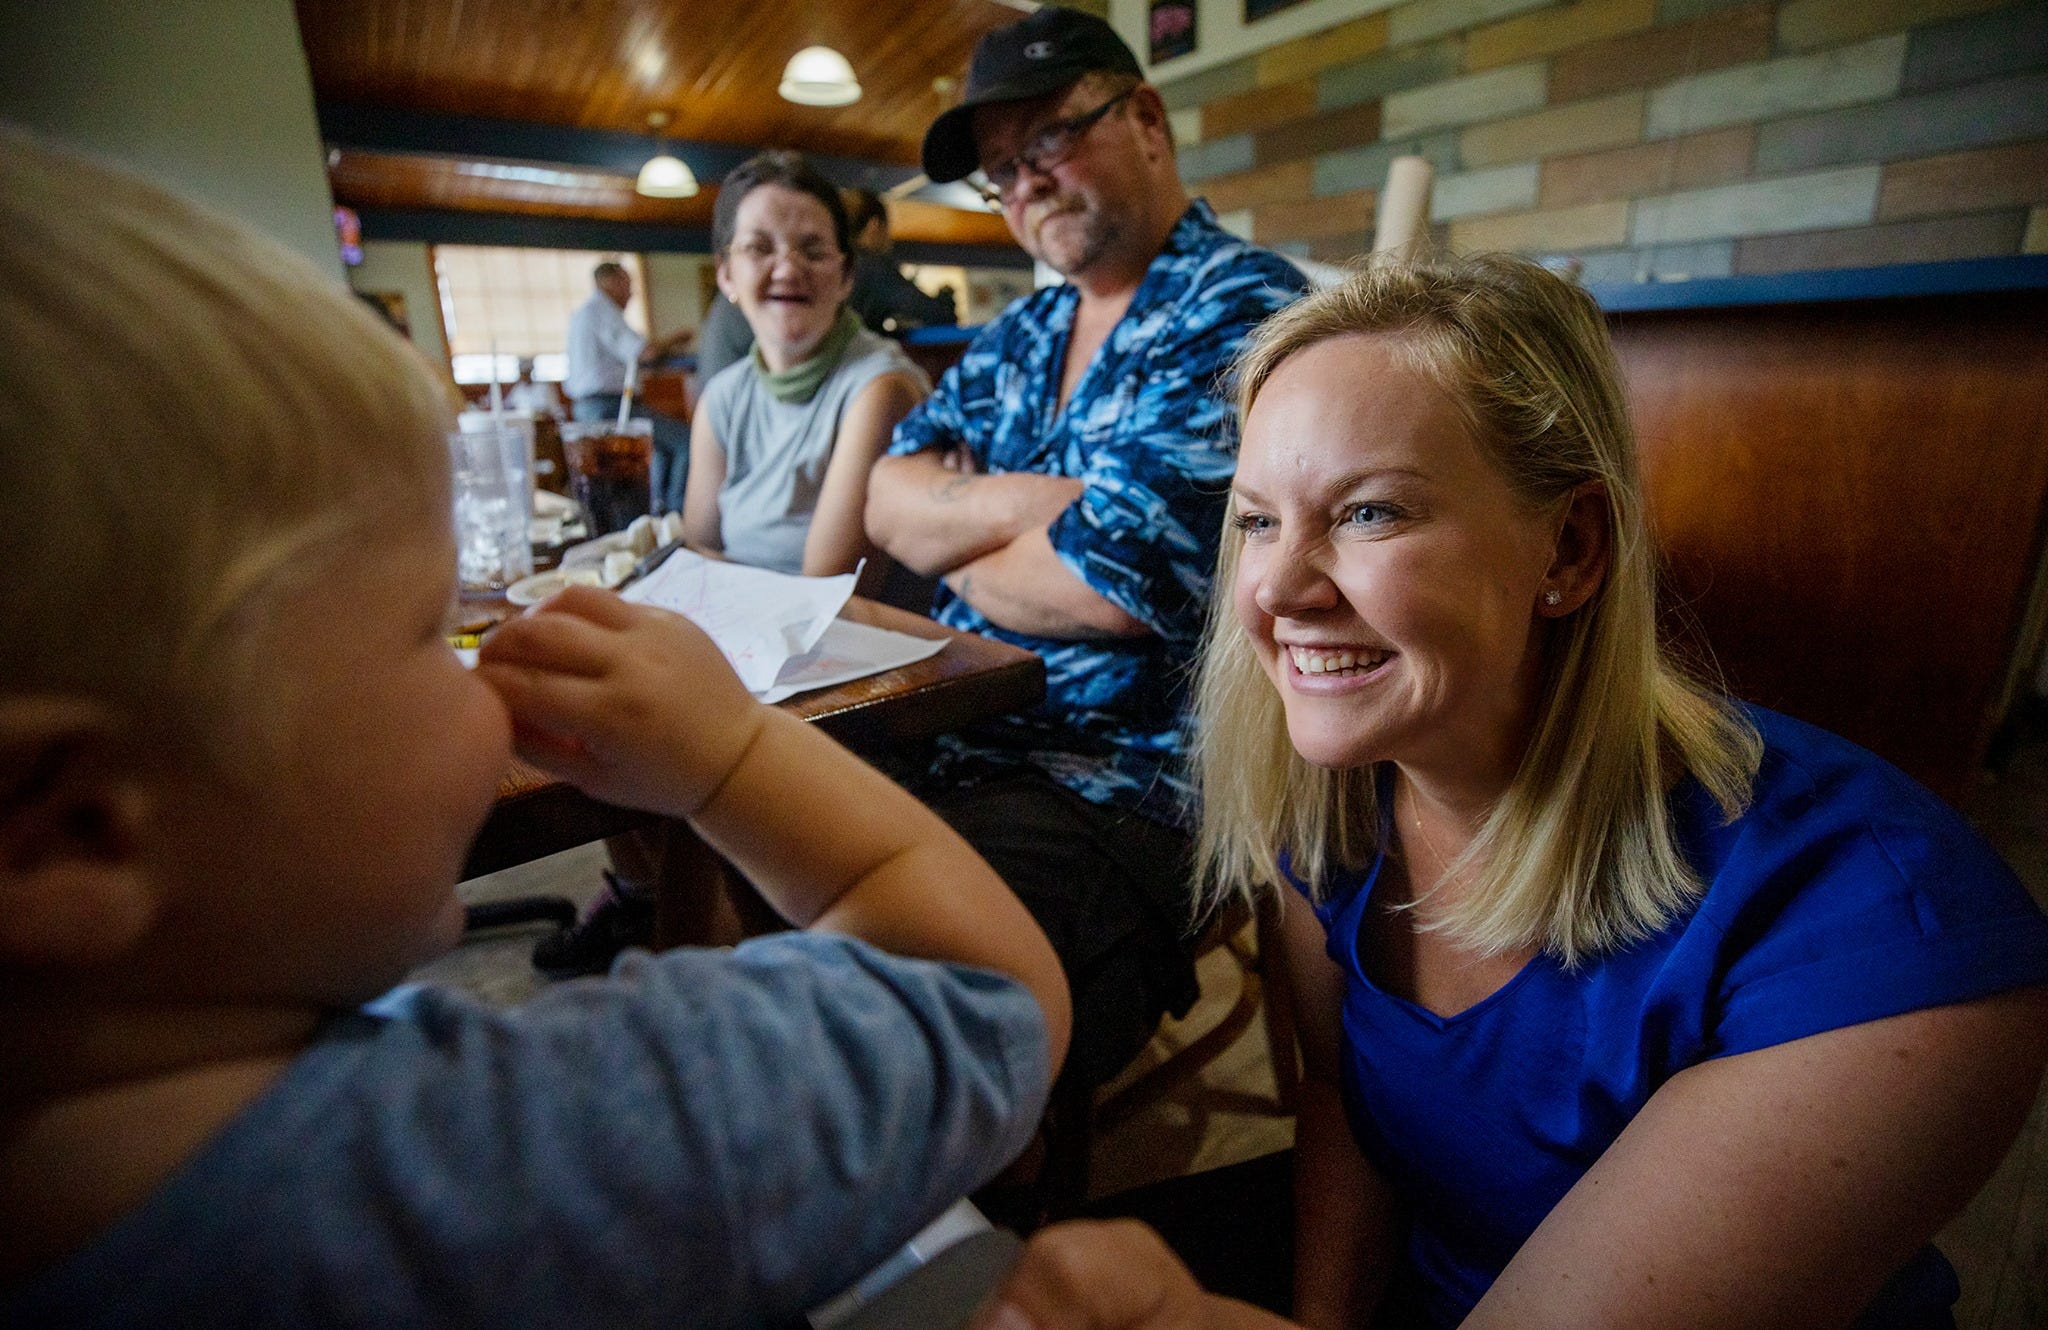 Better Together’s Megan Rose, right, joined Jack and his parents Kyrstal Hartman and Jason Davis for lunch at the Farmers Market Restaurant in June.